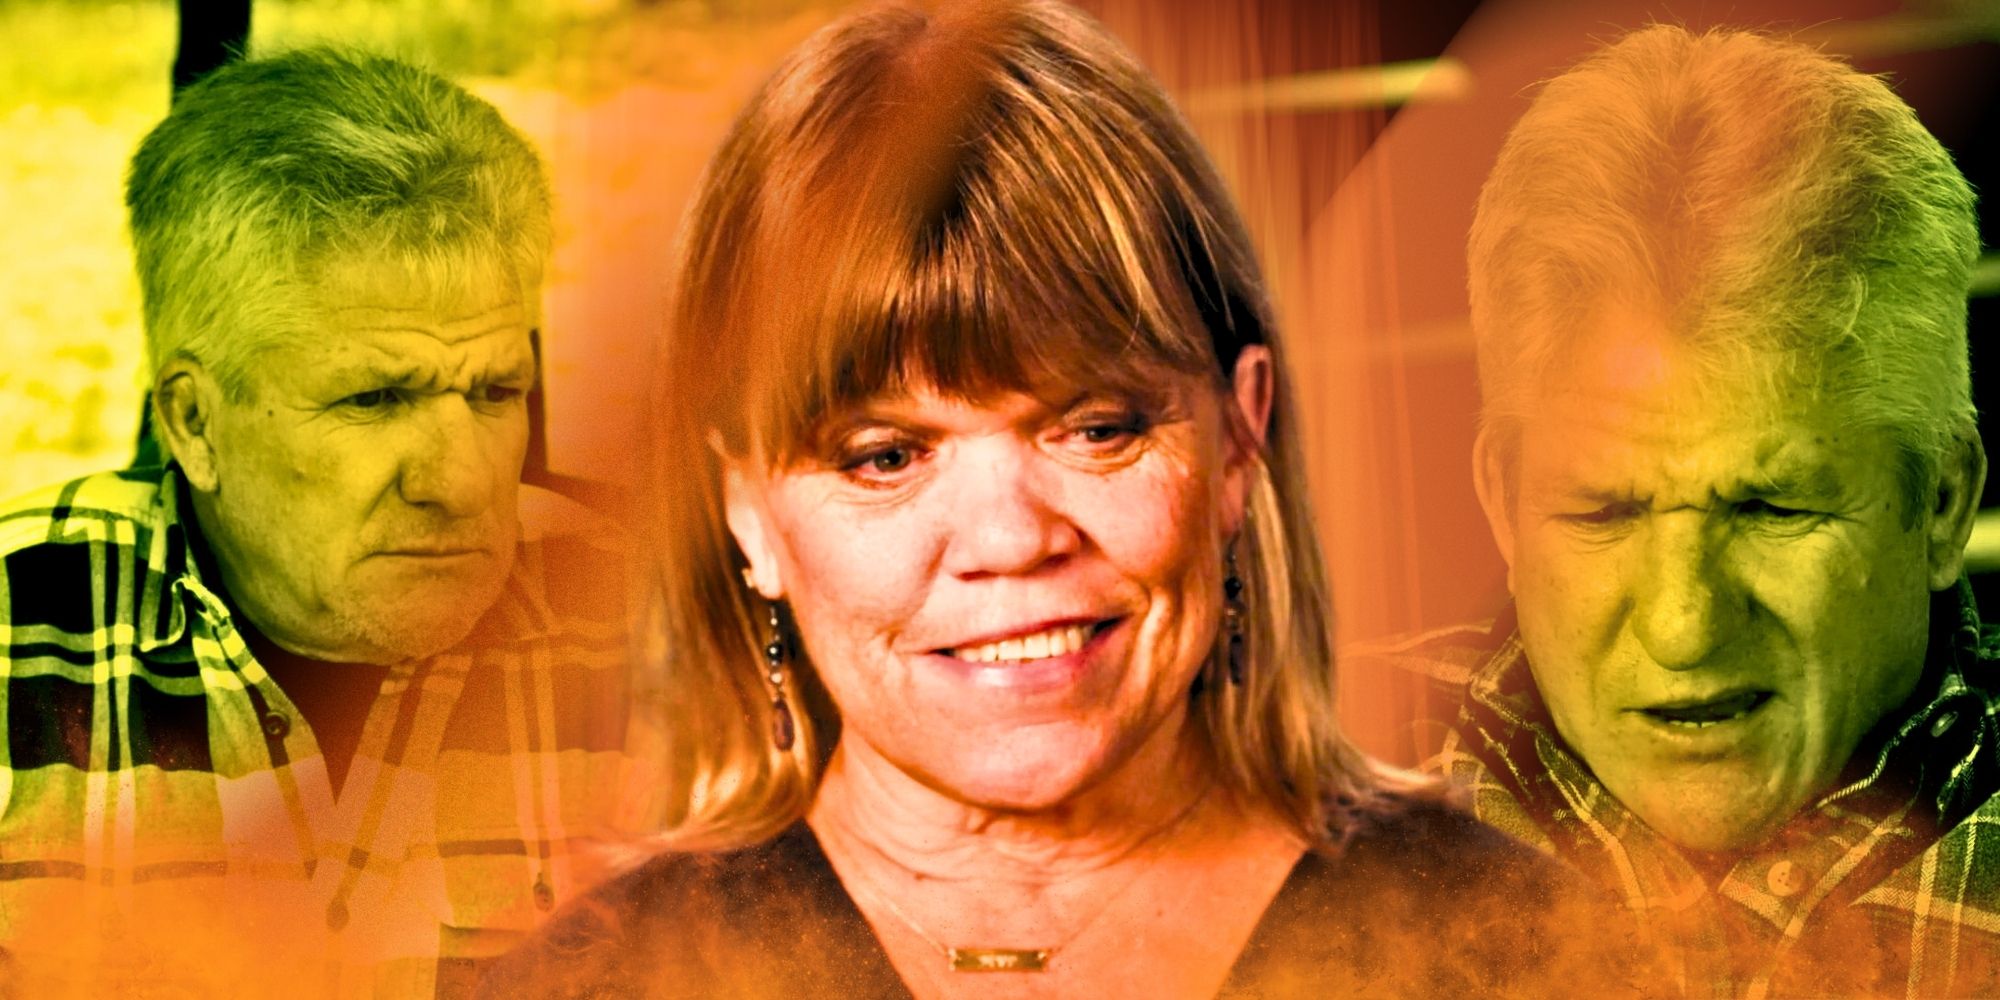 Montage of Amy and Matt Roloff from Little People, Big World looking gloomy with yellow and orange filters